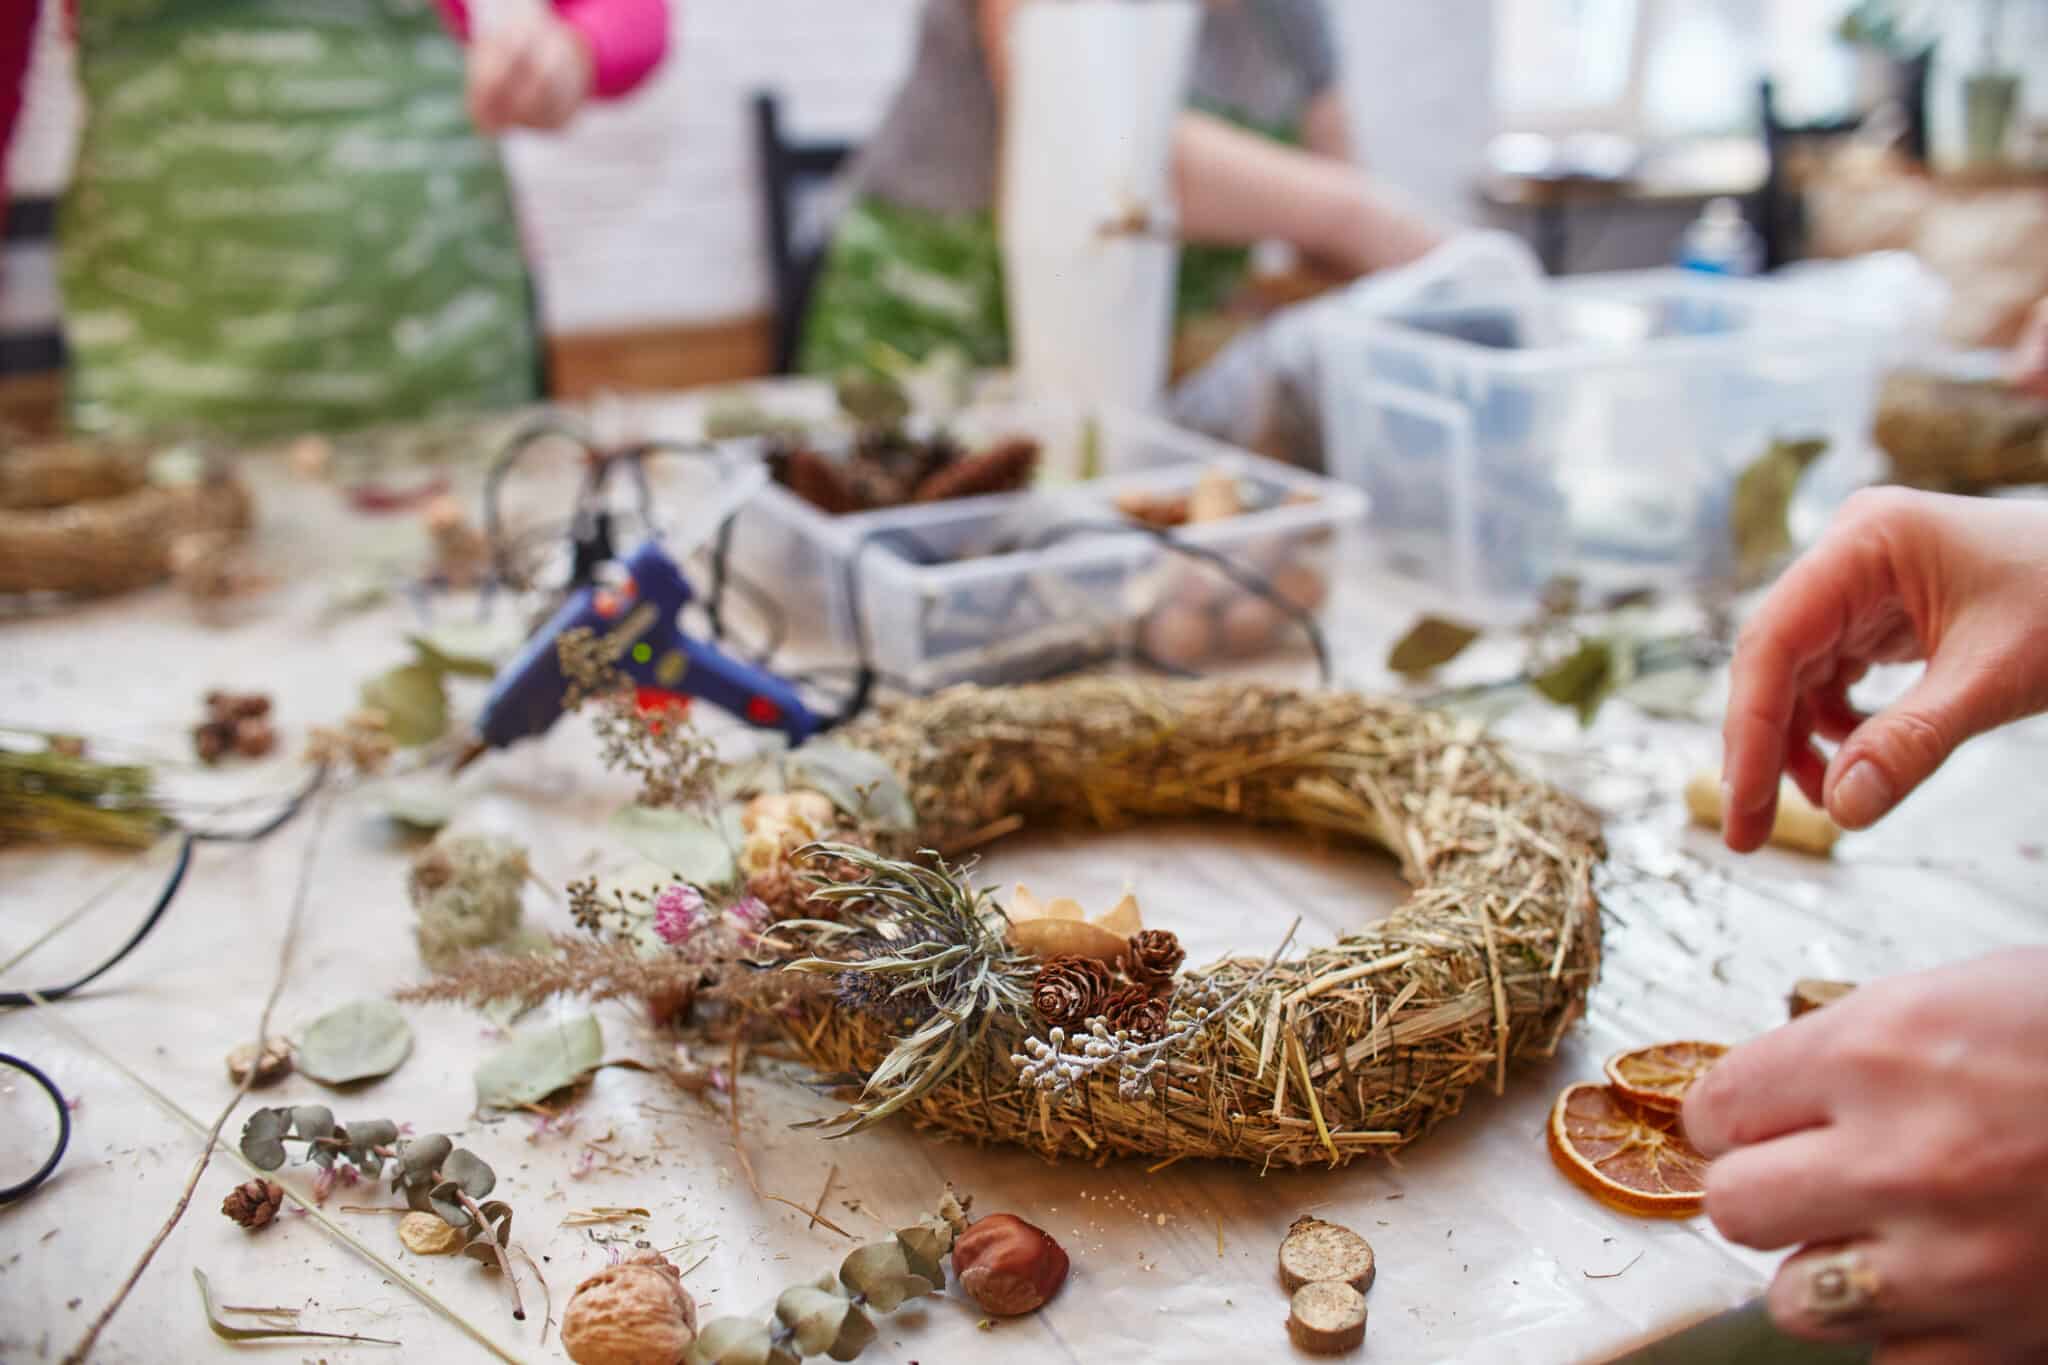 How To Use Your Extra Supplies For Wreaths (No More Waste!)